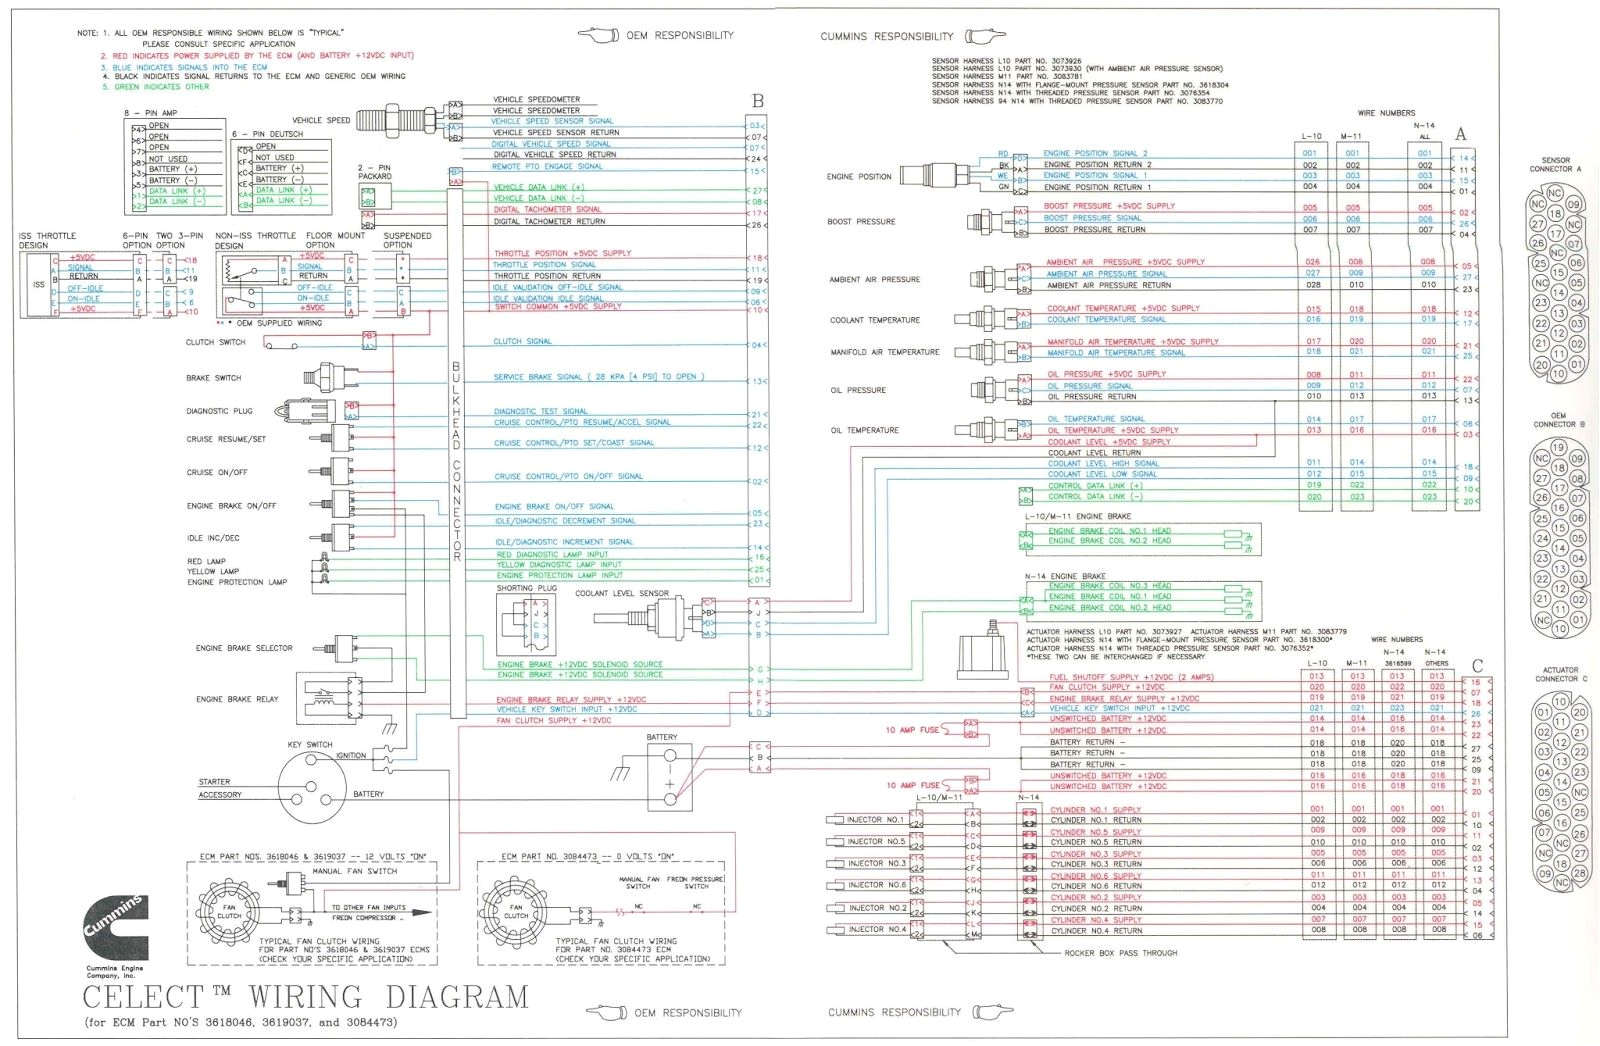 stunning n14 celect ecm wiring diagram photos electrical and for cummins